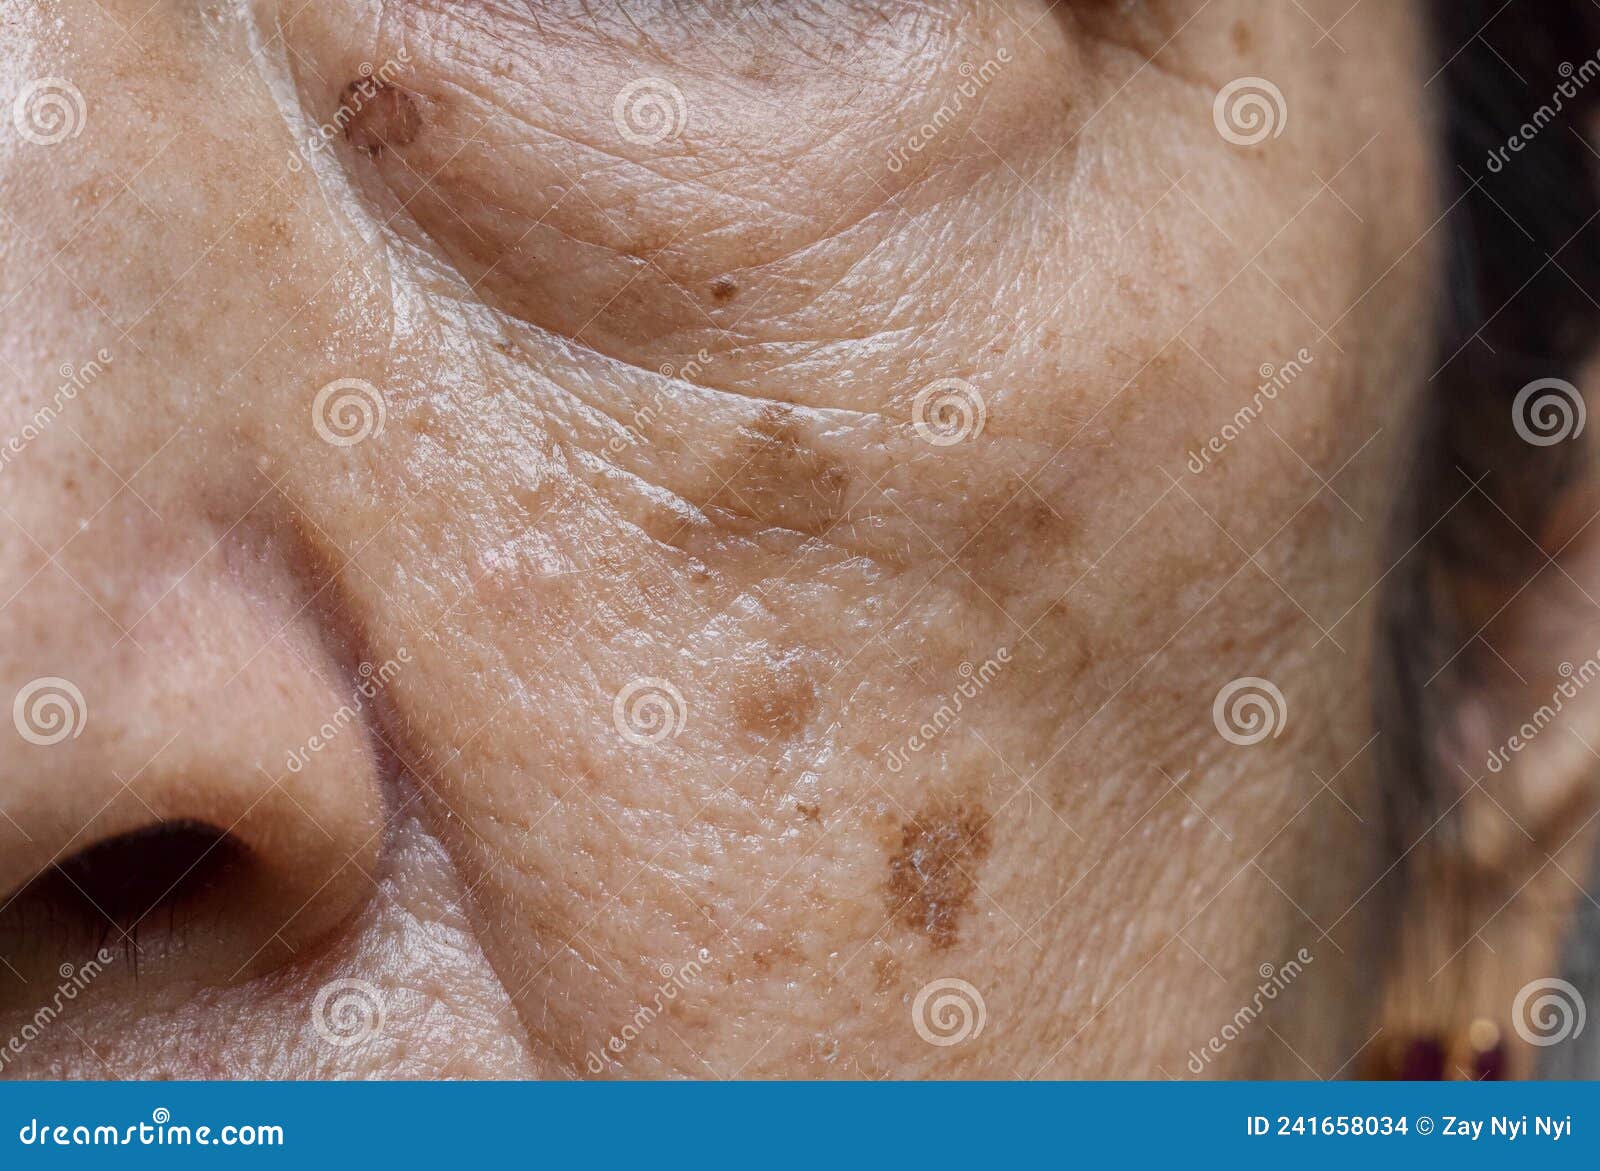 small brown patches called age spots on face of asian elder woman. they are also called liver spots, senile lentigo, or sun spots